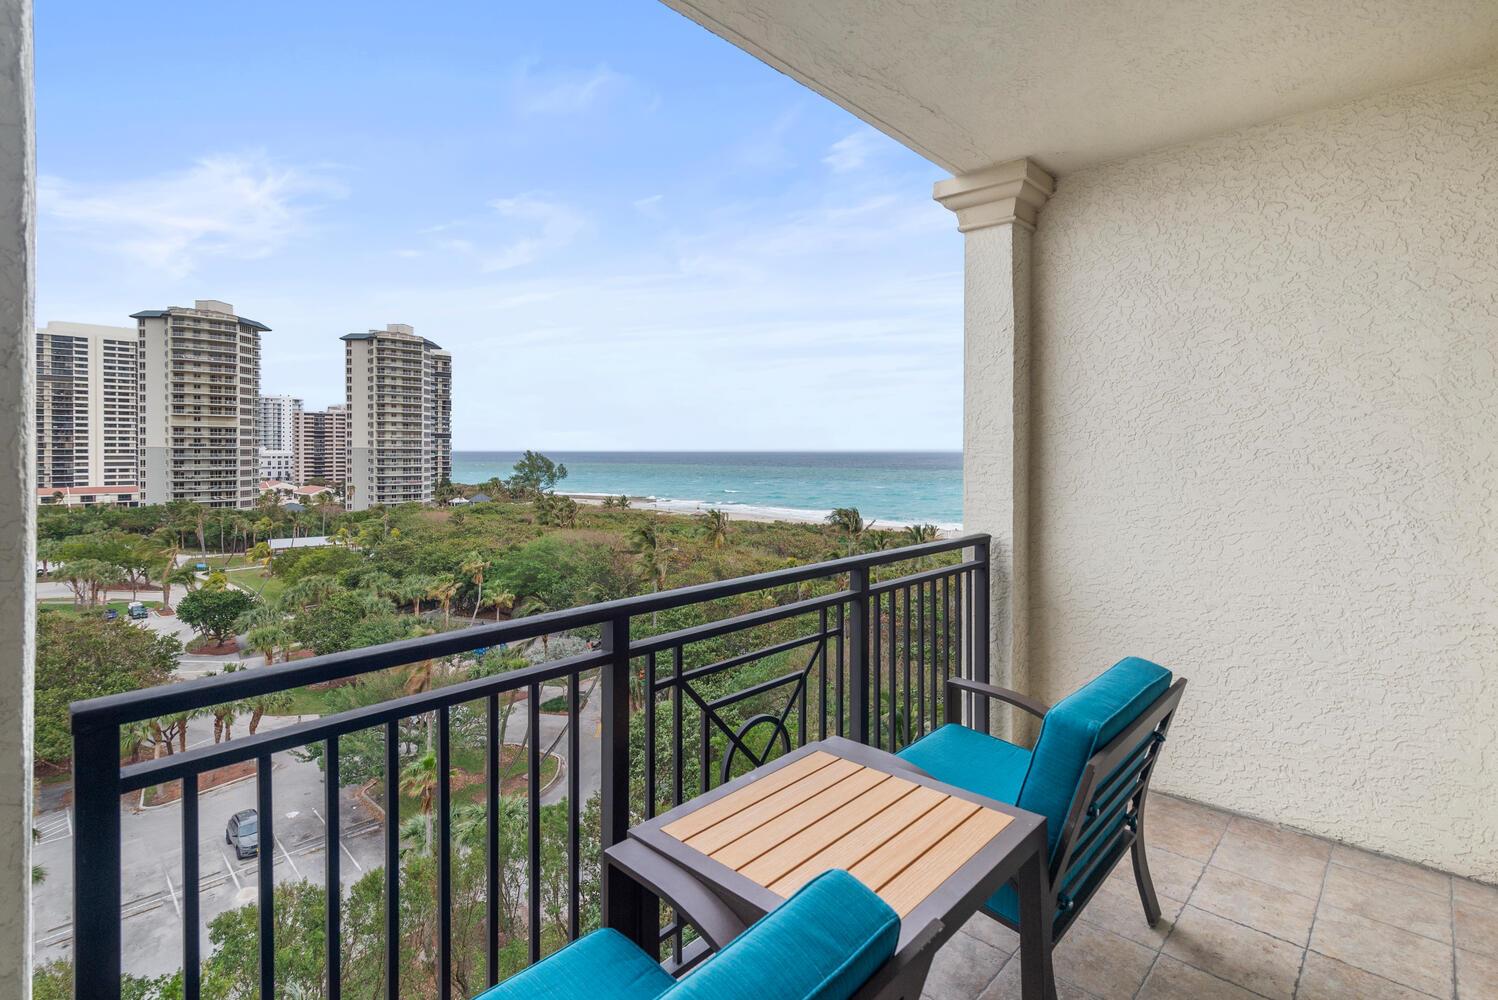 Indulge in the epitome of coastal living in this exquisite 1 BR Ocean View condo. Imagine starting your day with an awe-inspiring view of the boundless ocean, the rhythm of waves setting the tone for a day of serenity. When you yearn for a leisurely stroll, head to the beach or the adjacent park beckons, offering a lush, green escape. Don't miss your chance to own a slice of paradise - seize this opportunity for a lifestyle where every view is a masterpiece, granting you exclusive access to the world-class amenities of the Marriott Resort.Bask in the sun-drenched beaches, savor gourmet dining, and relish in the opulence of a lifestyle where every moment is a resort-worthy experience. Bask in the sun-drenched beaches, savor gourmet dining, and relish in the opulence of a lifestyle where every moment is a resort-worthy experience. Enjoy the luxury of beachside attendants catering to your comfort. Keep in shape at the cutting-edge fitness center, unwind at a top-tier spa, and savor culinary delights at 3800 Ocean &amp; Lounge. Relish carefully crafted menus spotlighting local flavors from Florida's waters.  
Owning a condo hotel can offer dual benefits as an investment and a vacation option .  The benefits include potential rental income when you are not using it and the flexibility to participate in the optional rental program, allowing professional management to handle rentals on your behalf, maximizing returns.  Use it as a corporate retreat or to invite friends and family to enjoy.